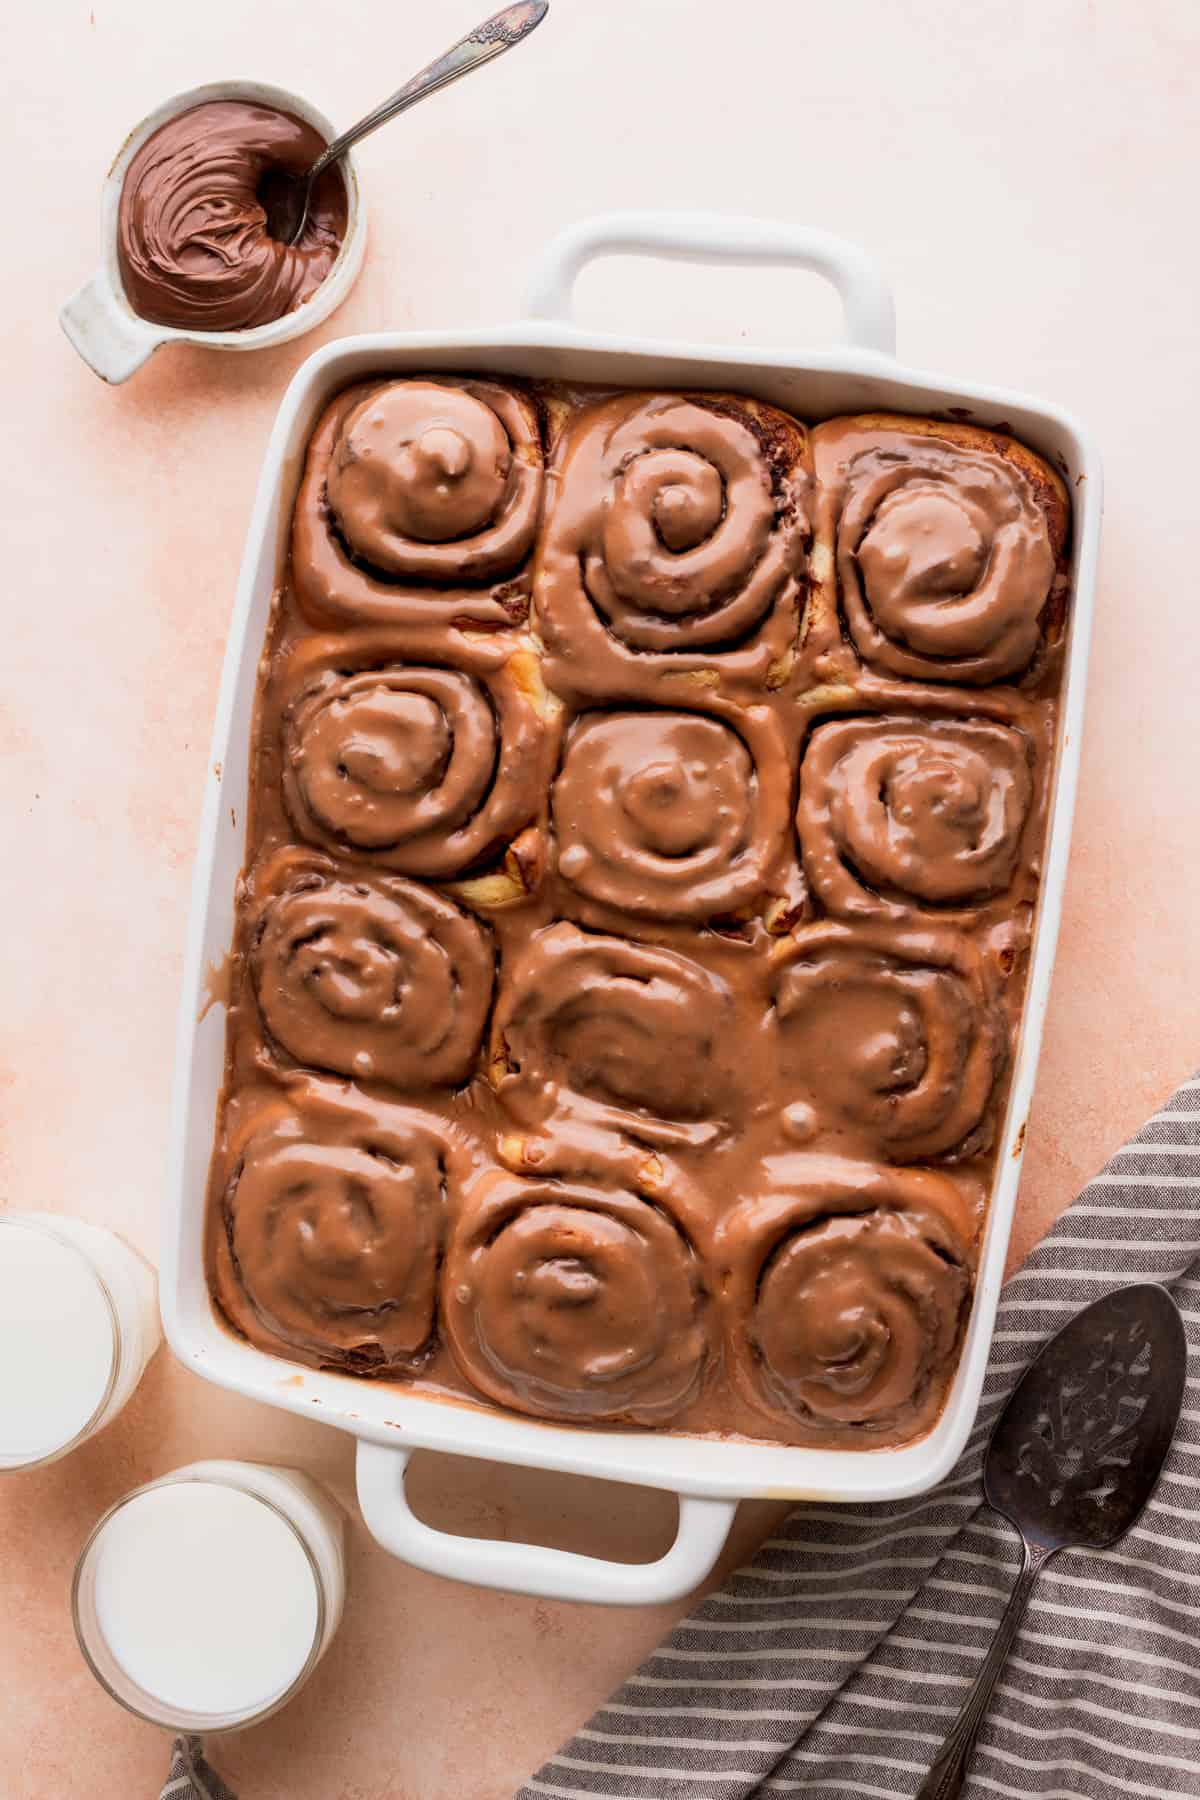 Iced rolls in a baking with a bowl of Nutella.